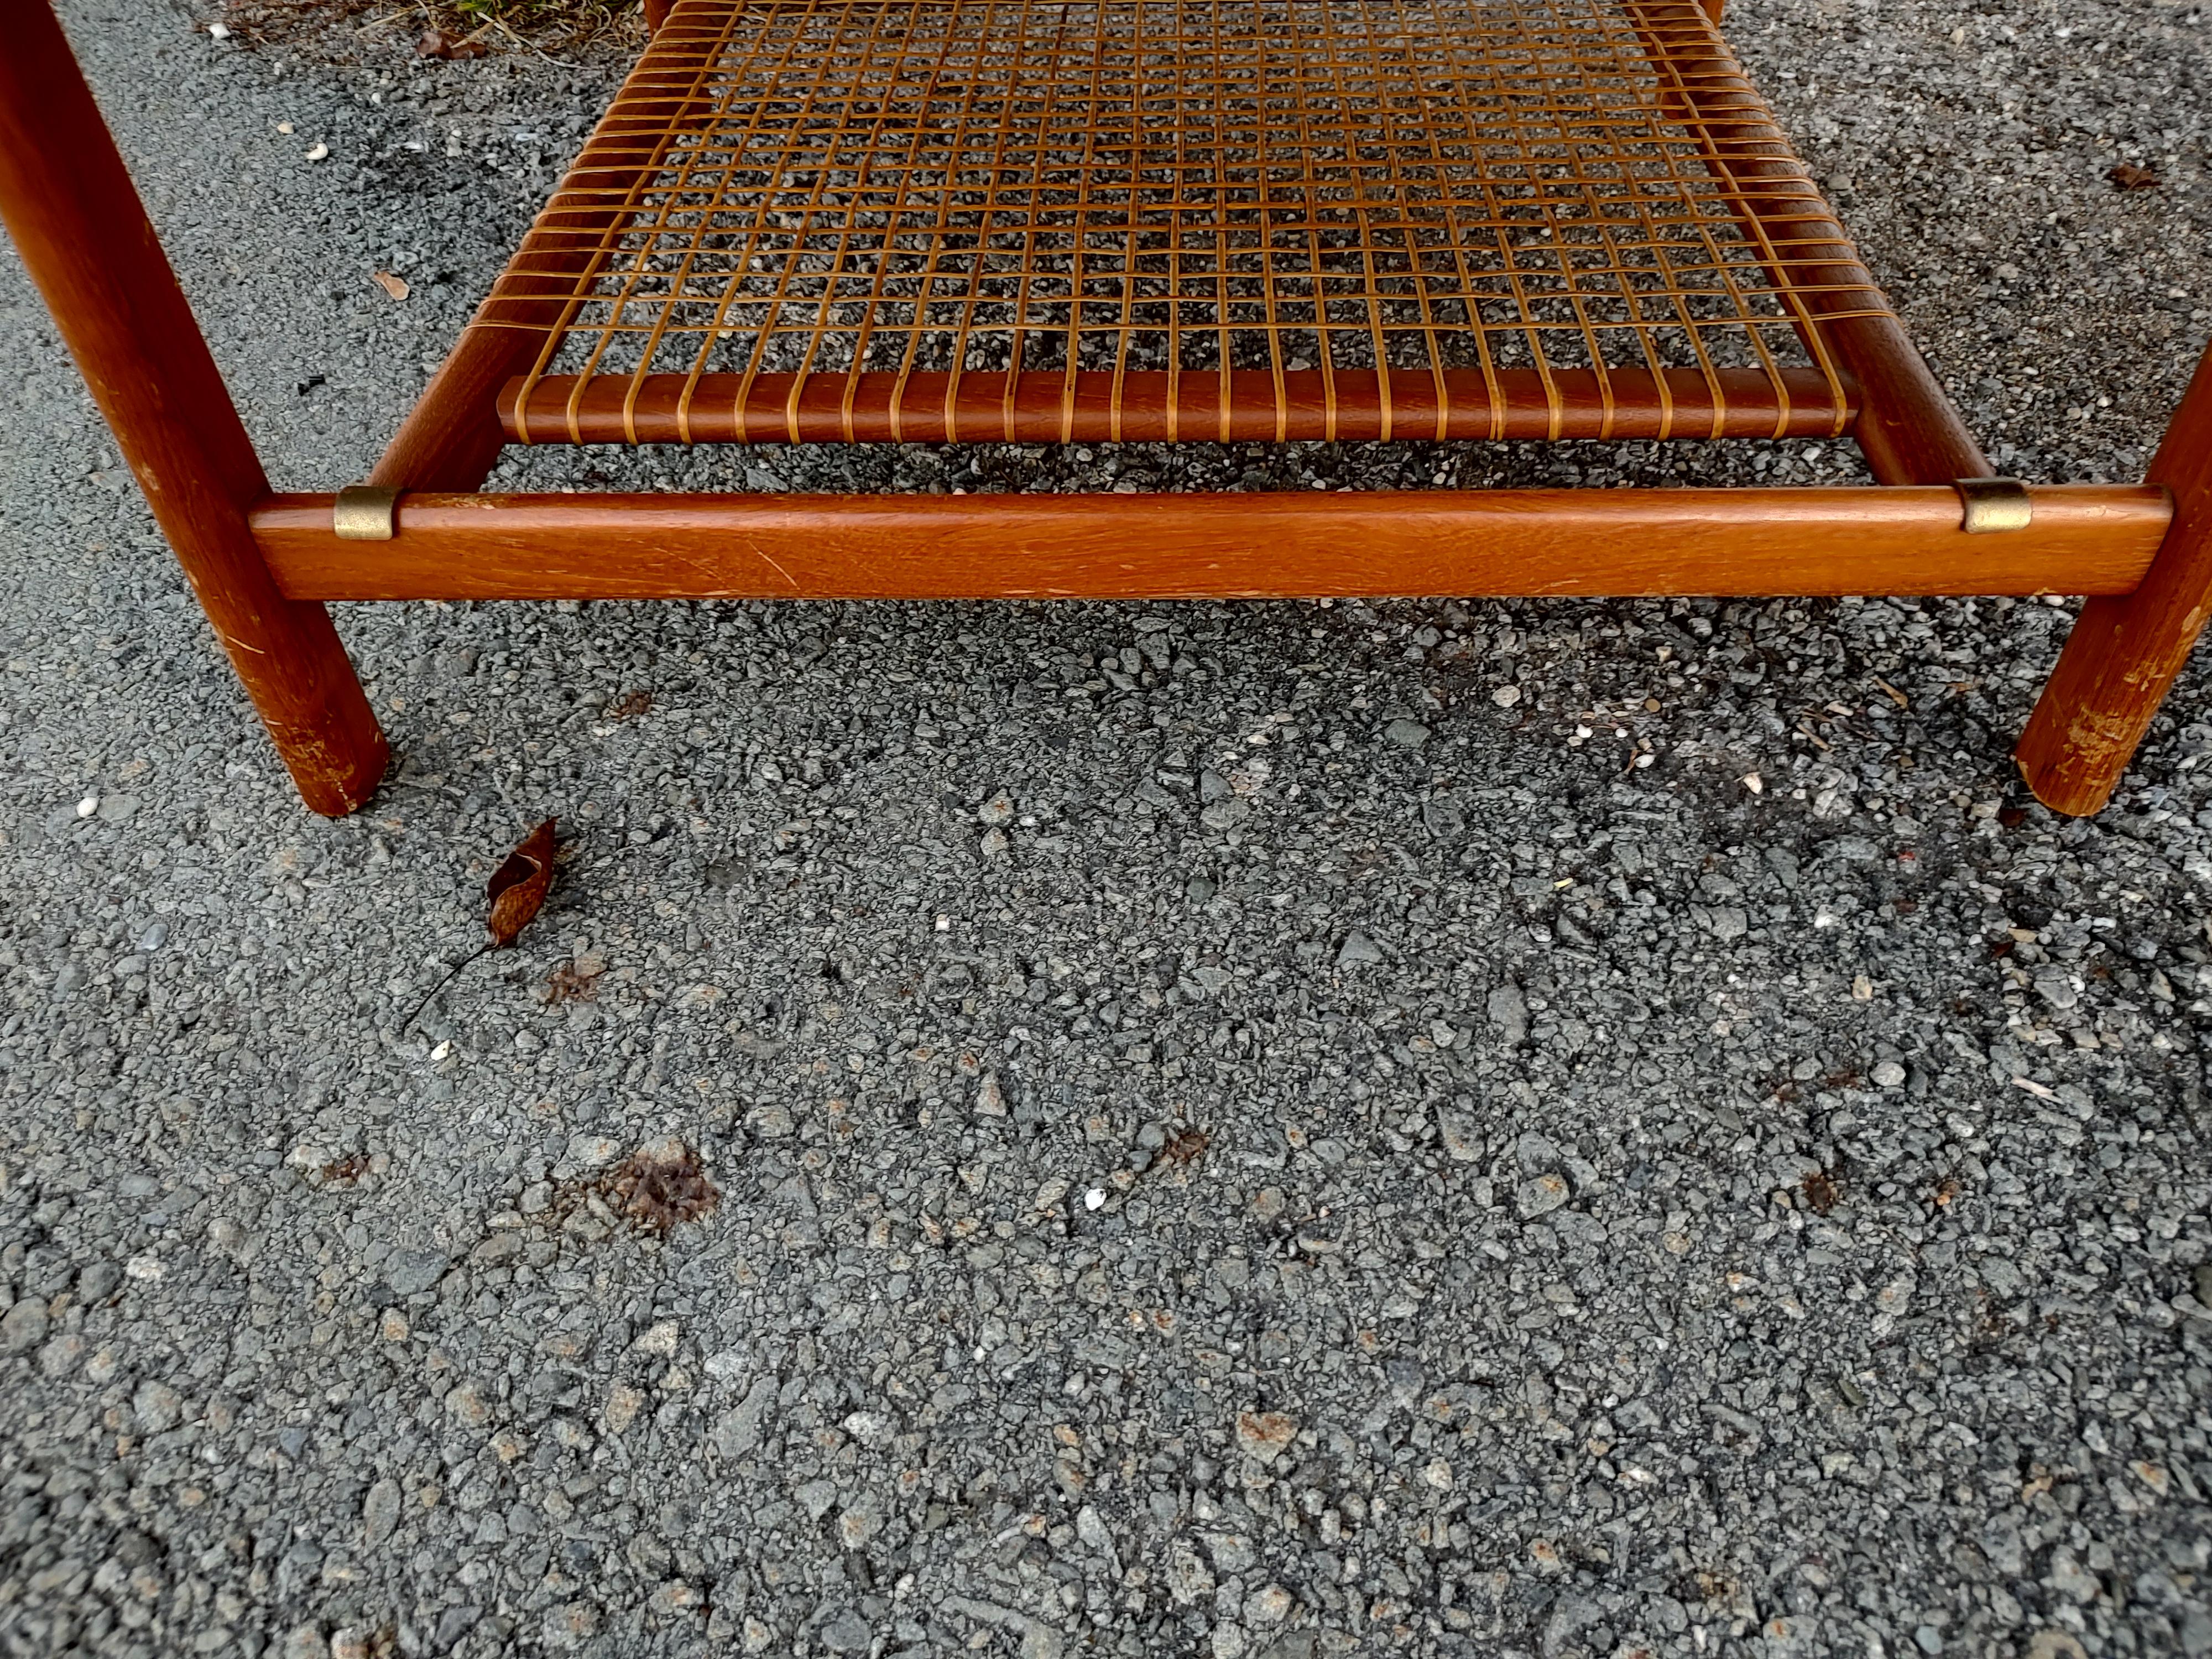 Hand-Crafted Mid-Century Modern Teak with Woven Shelf Cocktail Table by Dux Sweden For Sale